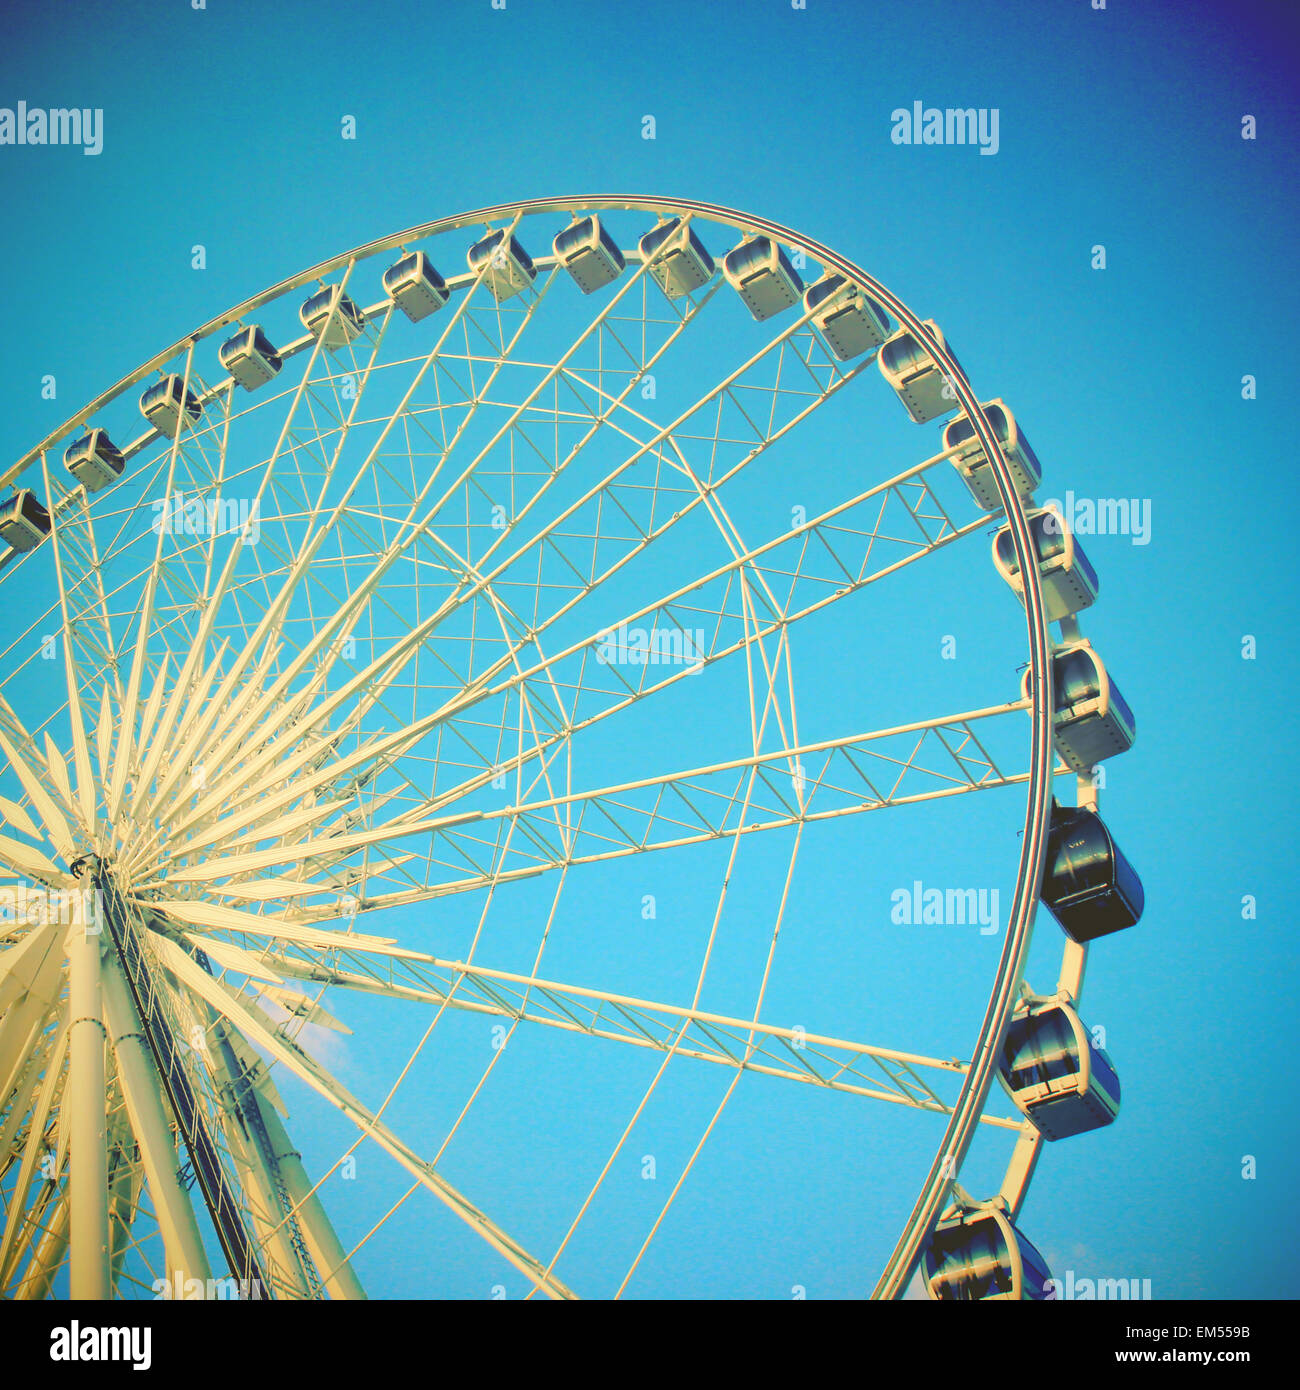 Ferris wheel with filter effect Stock Photo